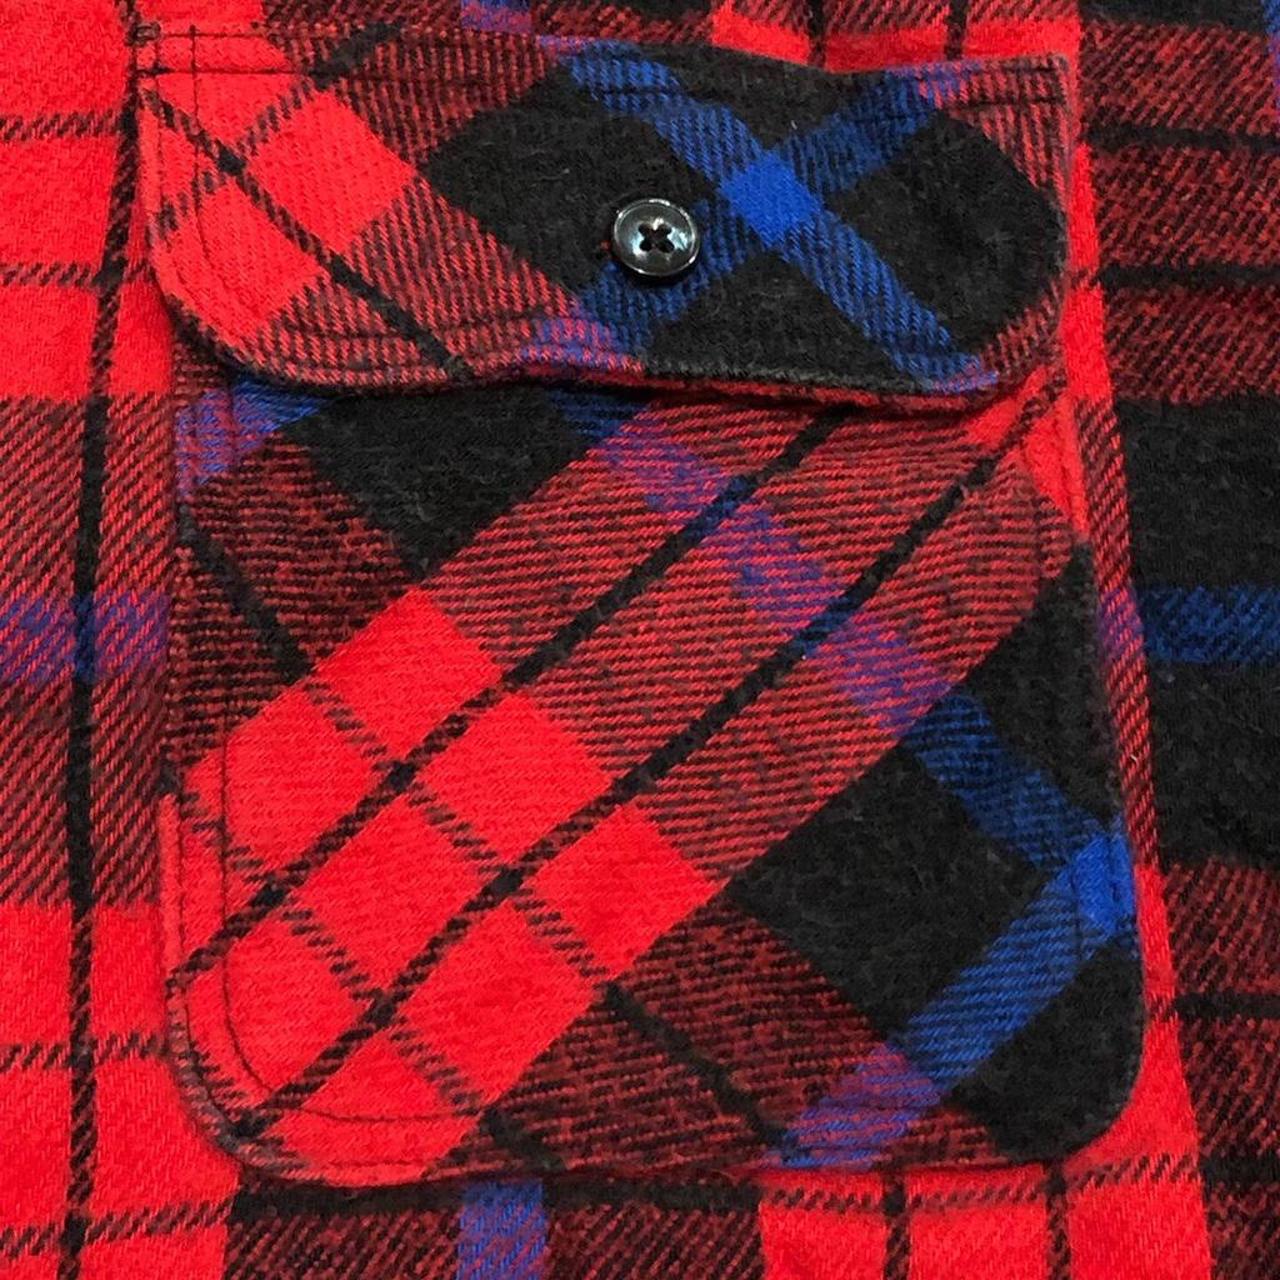 Product Image 2 - Vintage Prentiss Outdoors Flannel
Size XL